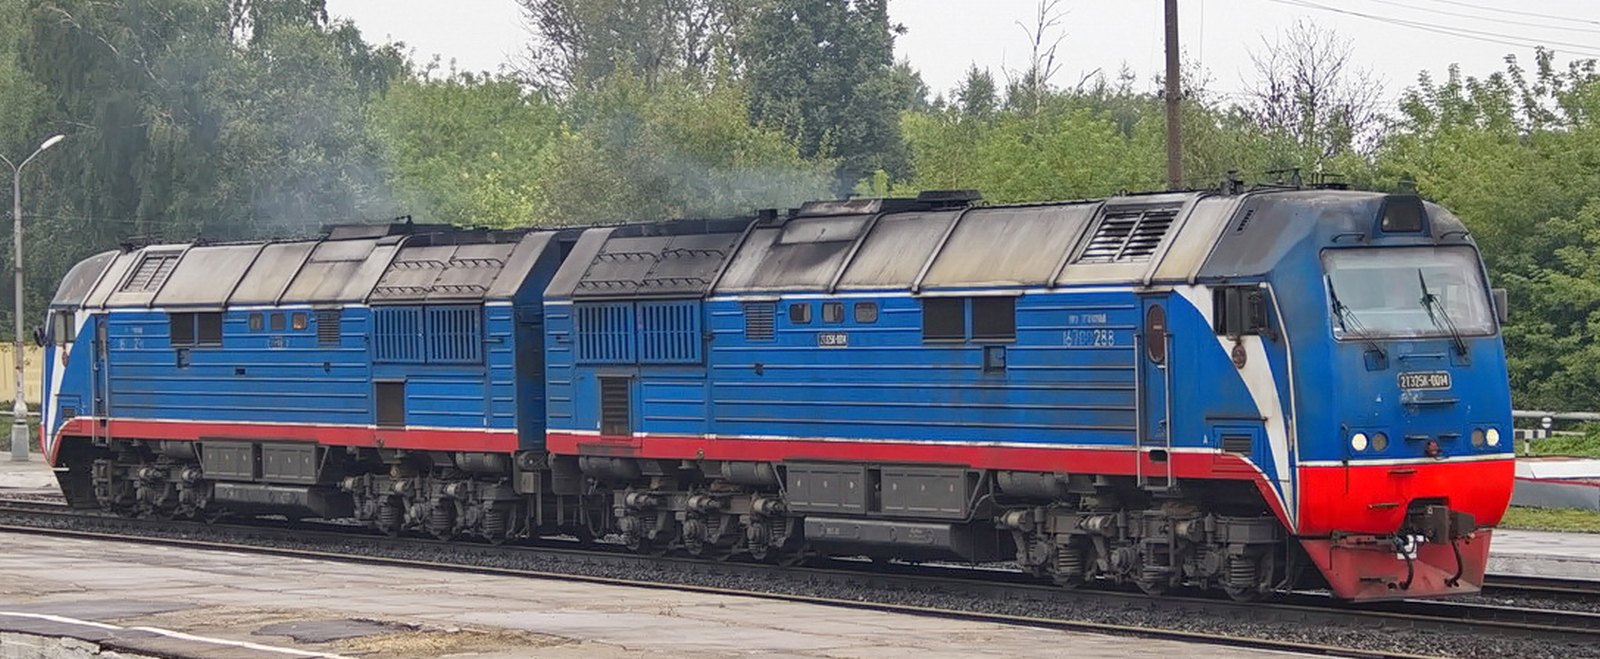 2ТЭ25К-0014 in September 2017 in the Tula area